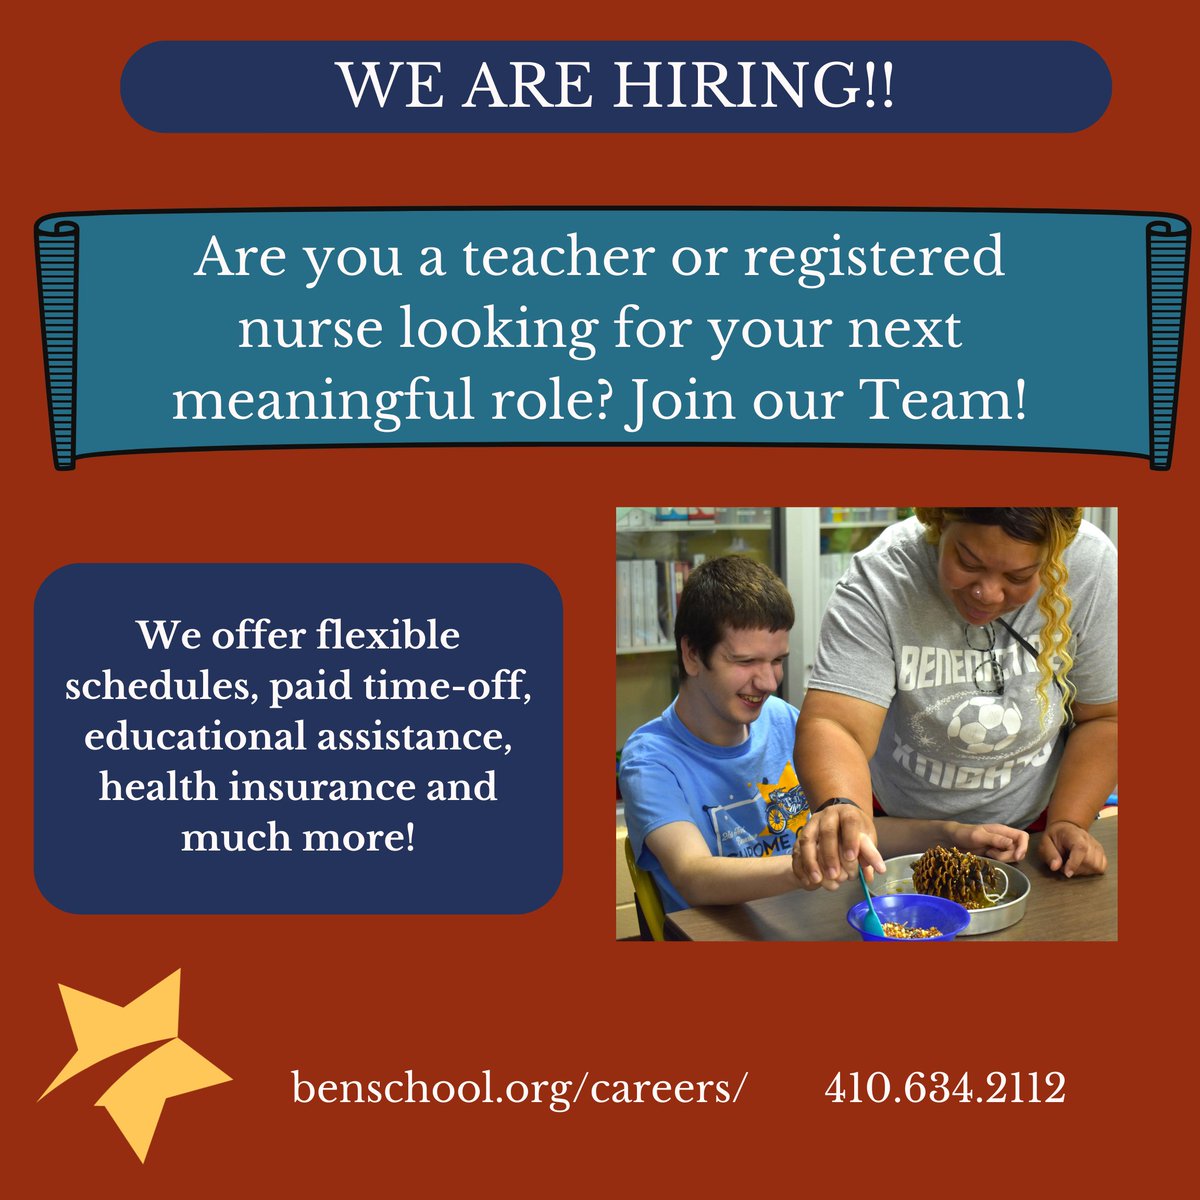 Make a meaningful difference! Join the team at Benedictine! #bensupports #developmentallydisabled #autism #diabilityinclusion #mdjobs #hiring #teacherjobs #rnjobs